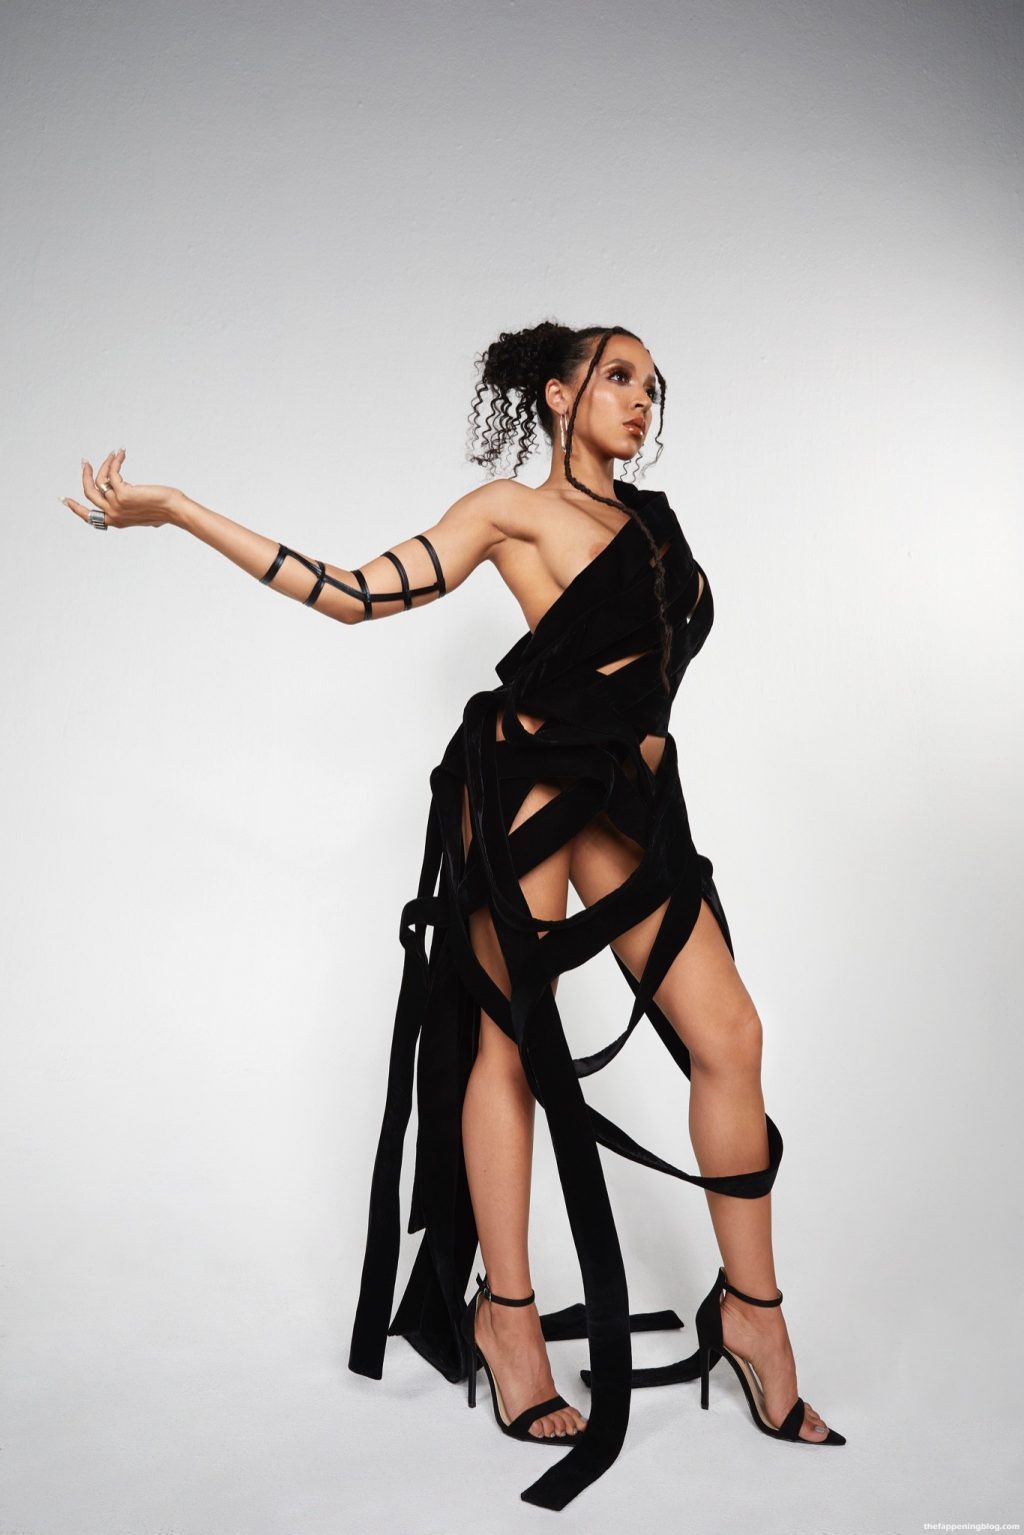 Best Tinashe Shows Off Her Sexy Tits (3 New Photos)